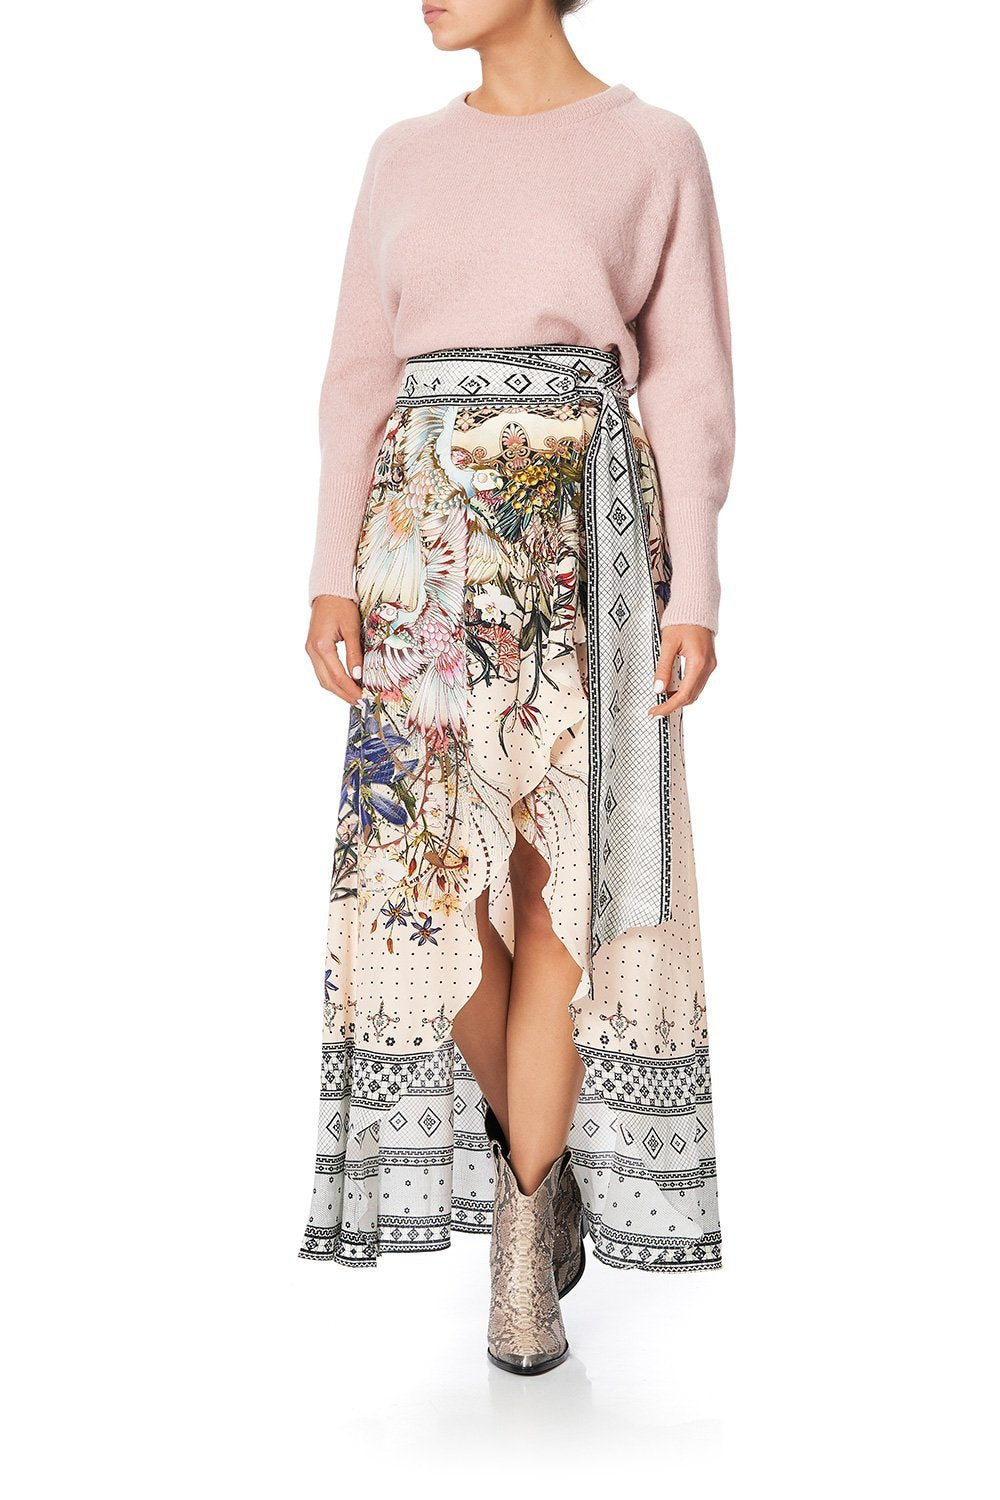 WRAP HIGH LOW SKIRT KINDRED SKIES